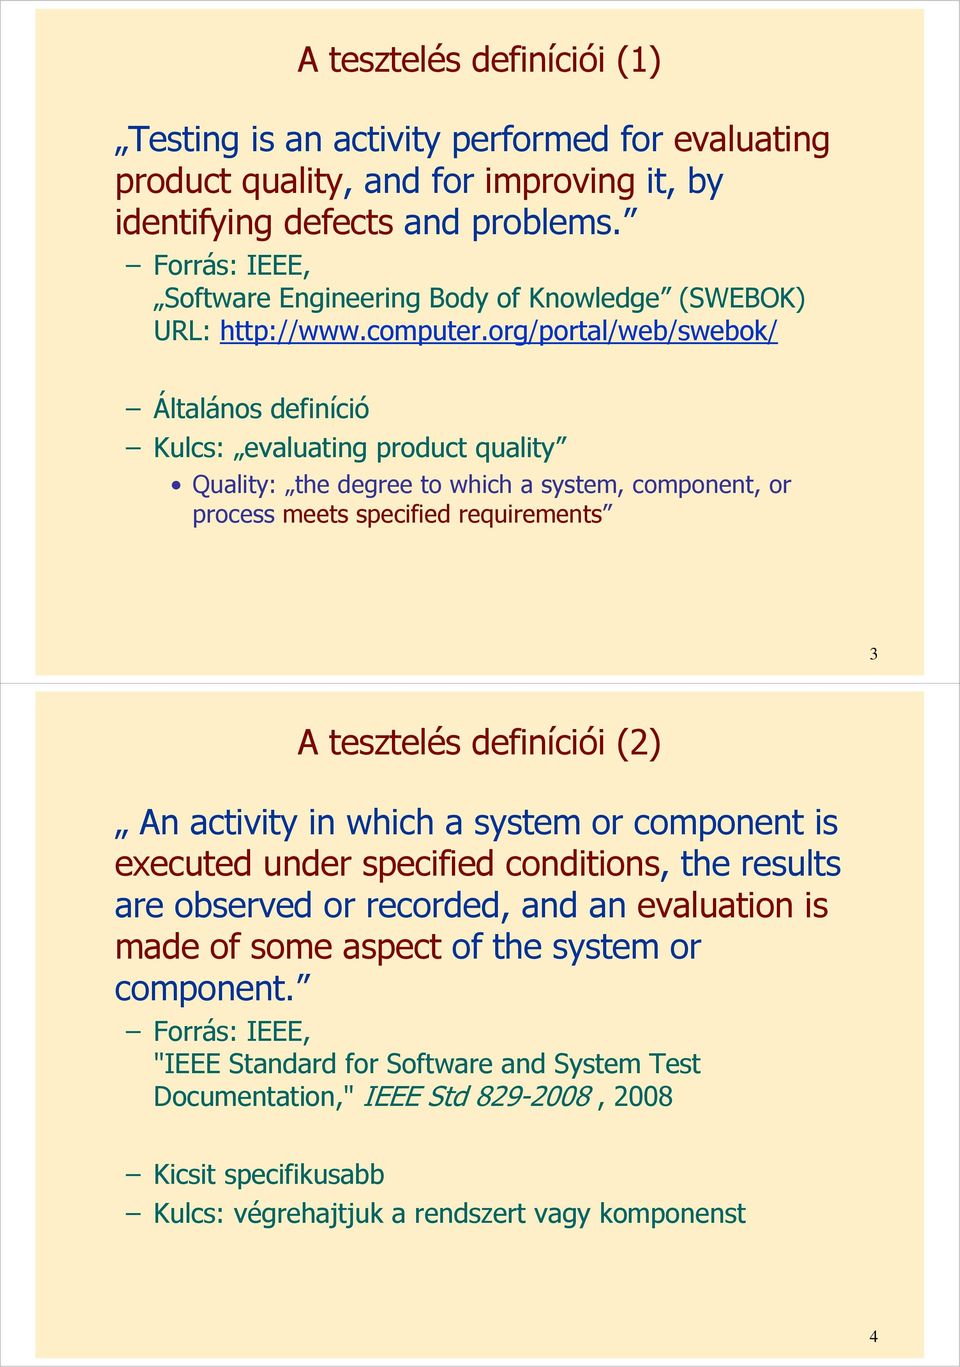 org/portal/web/swebok/ Általános definíció Kulcs: evaluating product quality Quality: the degree to which a system, component, or process meets specified requirements 3 A tesztelés definíciói (2)